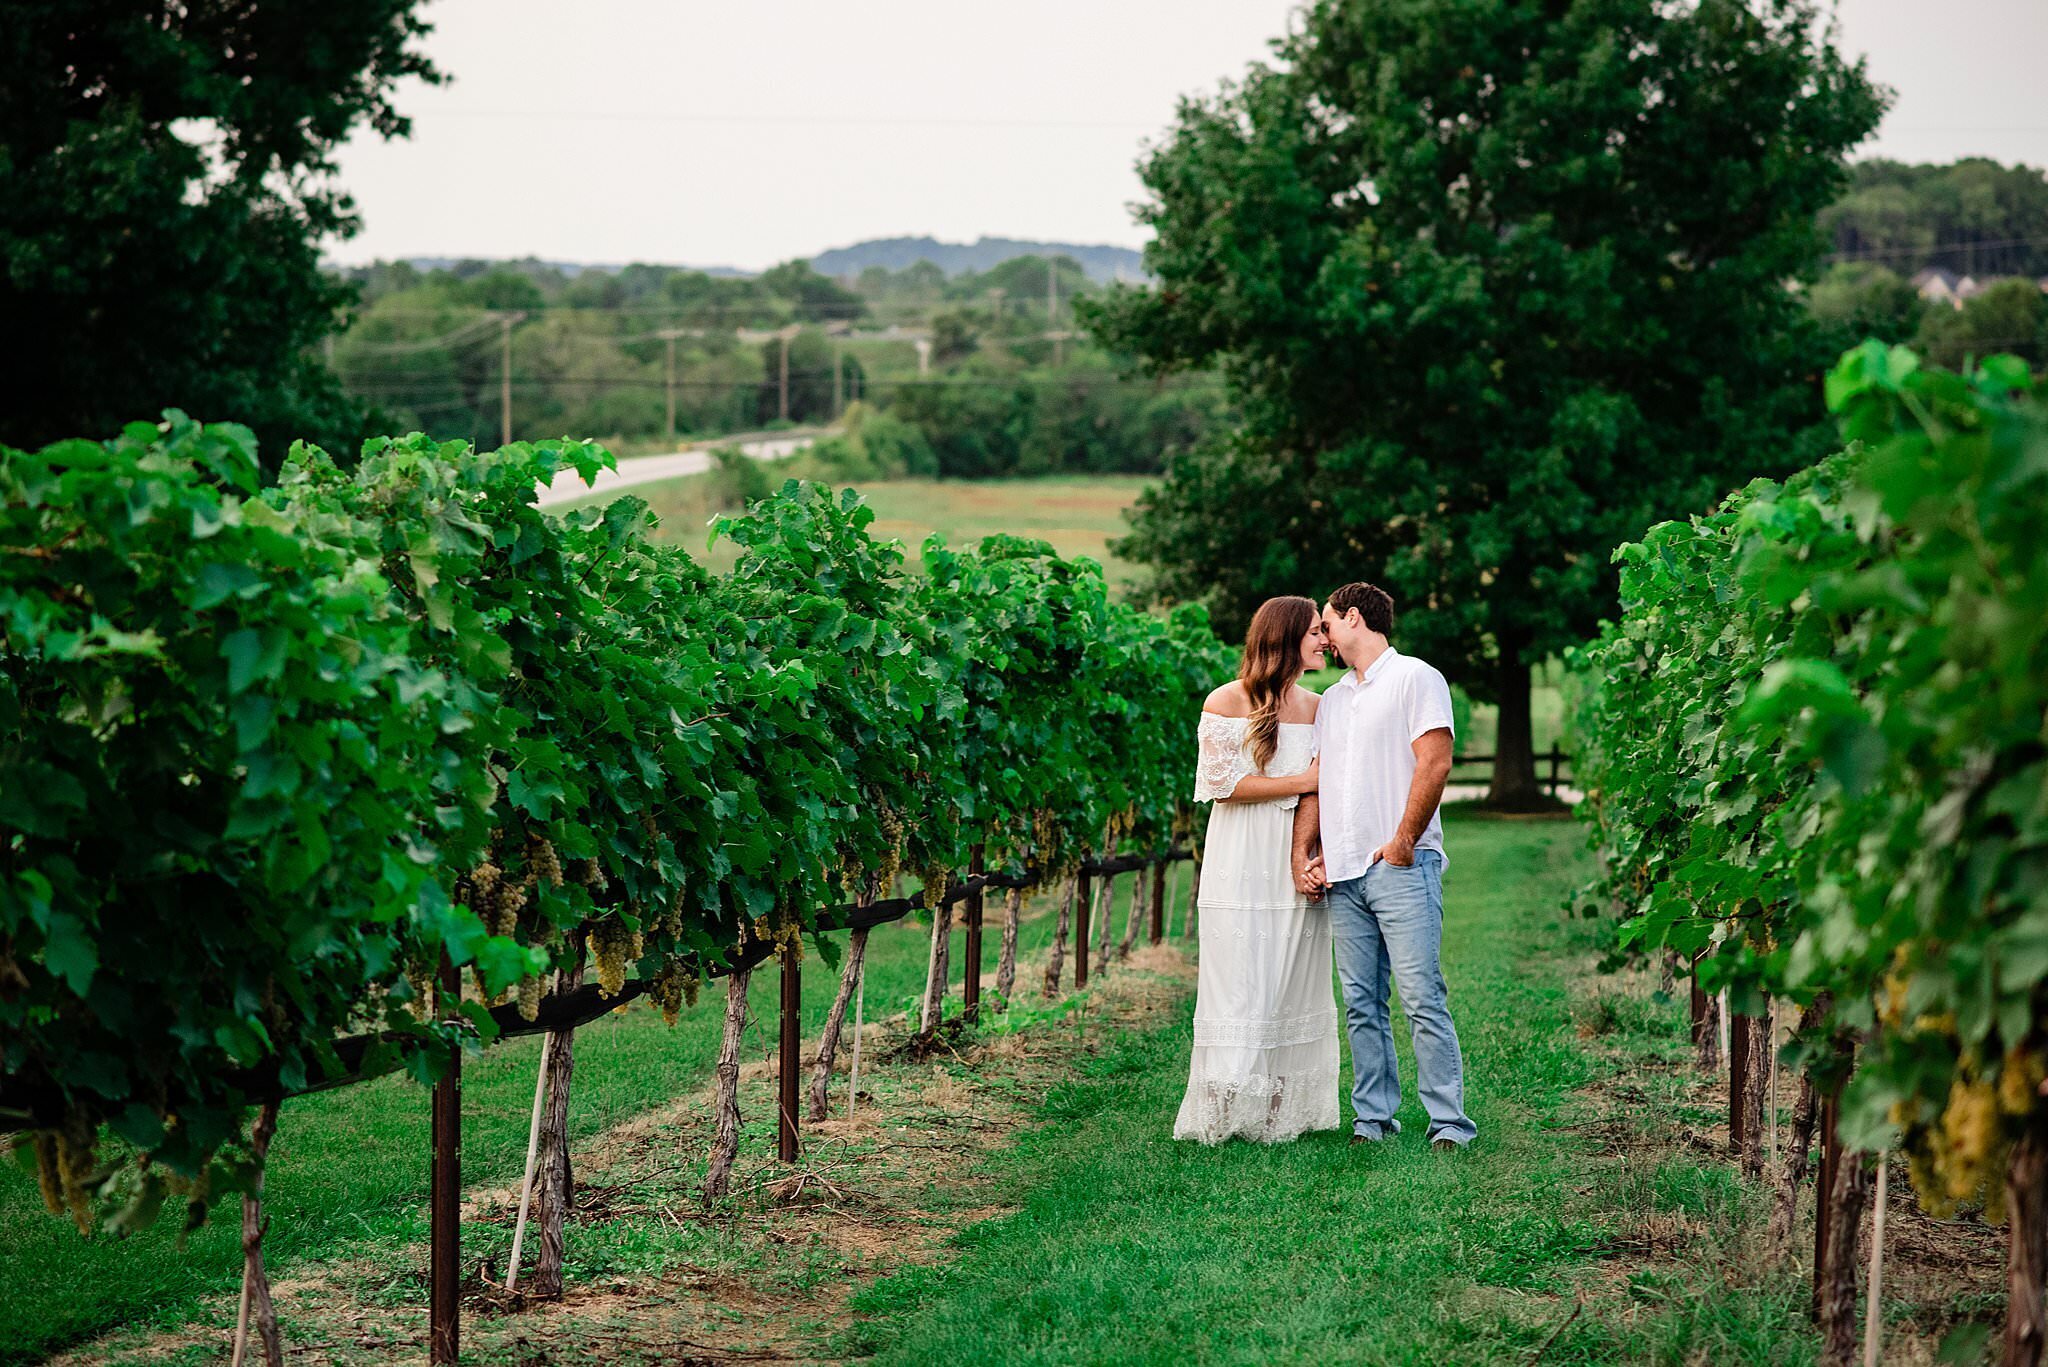 Couple standing in the middle of the vineyards snuggled together nose to nose with the rolling hills in the distance